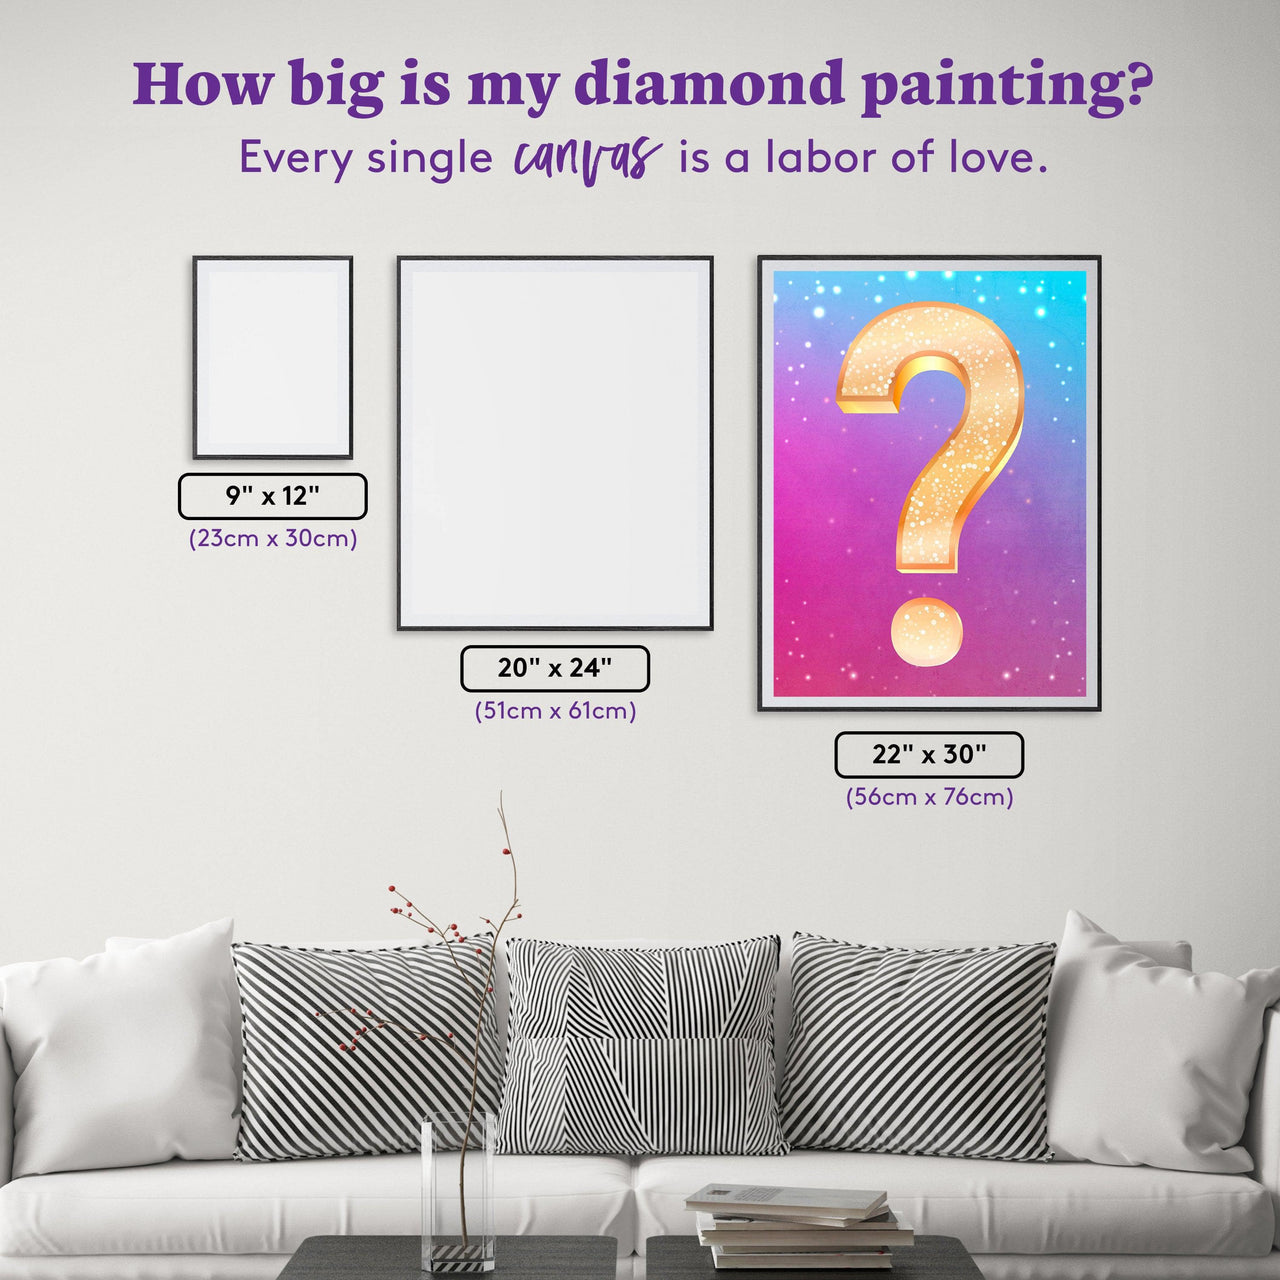 Diamond Painting Mystery Kit - Fantasy 22" x 30" (56cm x 76cm) / Square With 39 Colors Including 4 ABs / 68,320